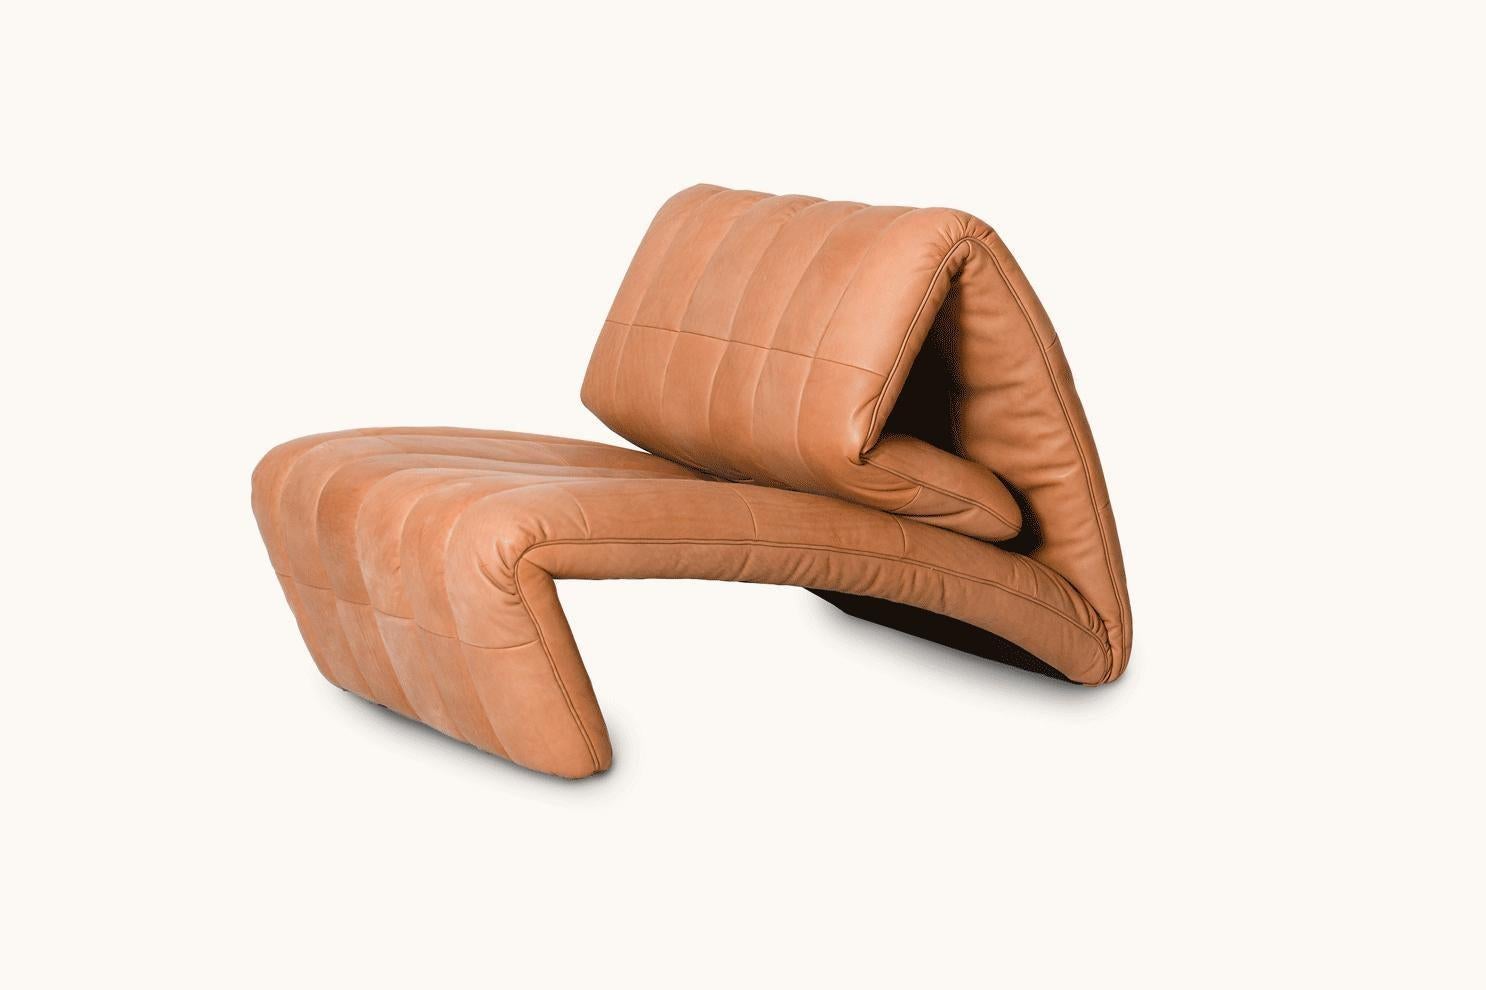 Geometric form and the simplest function. A seat suddenly turns into a comfortable recliner – DS-266 condenses more than 30 years of work by designer Stefan Heiliger into a highly individual sculpture characterized by a love of geometric forms and